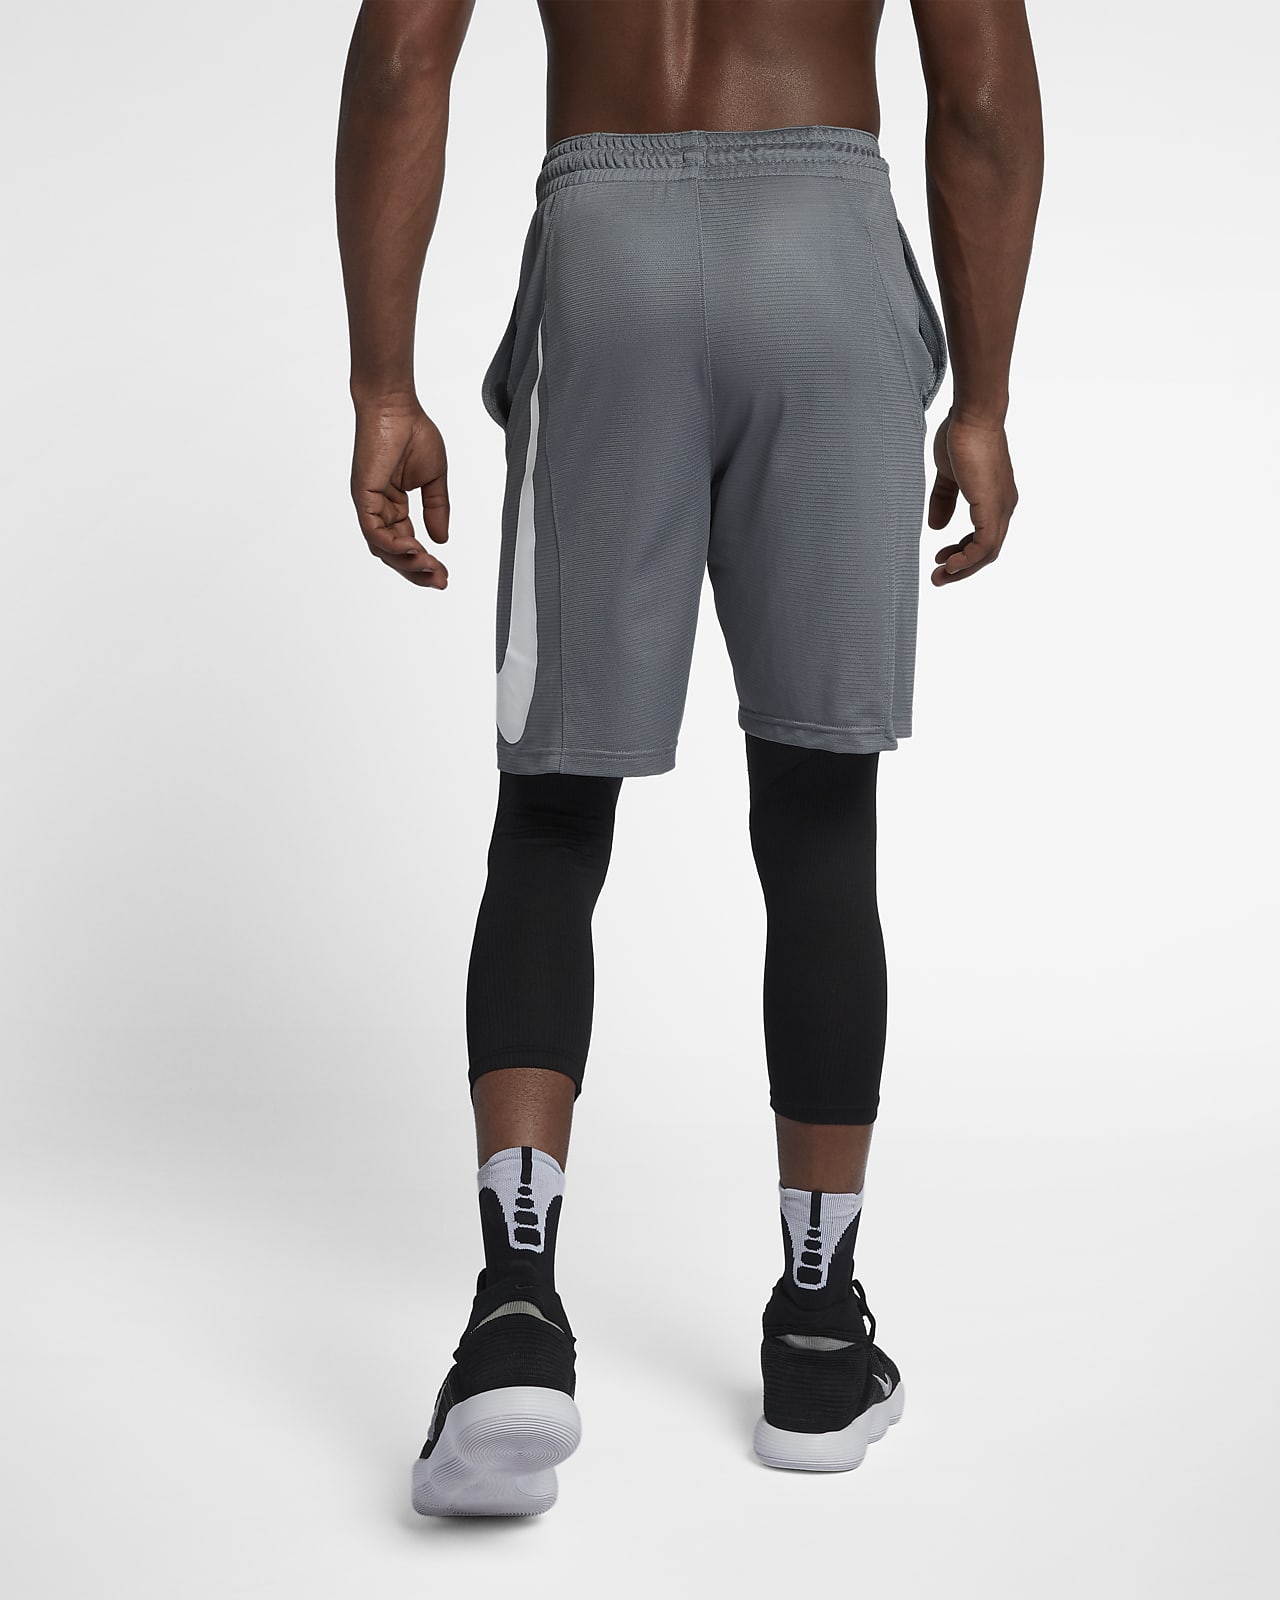 nike cycling shorts for basketball online -